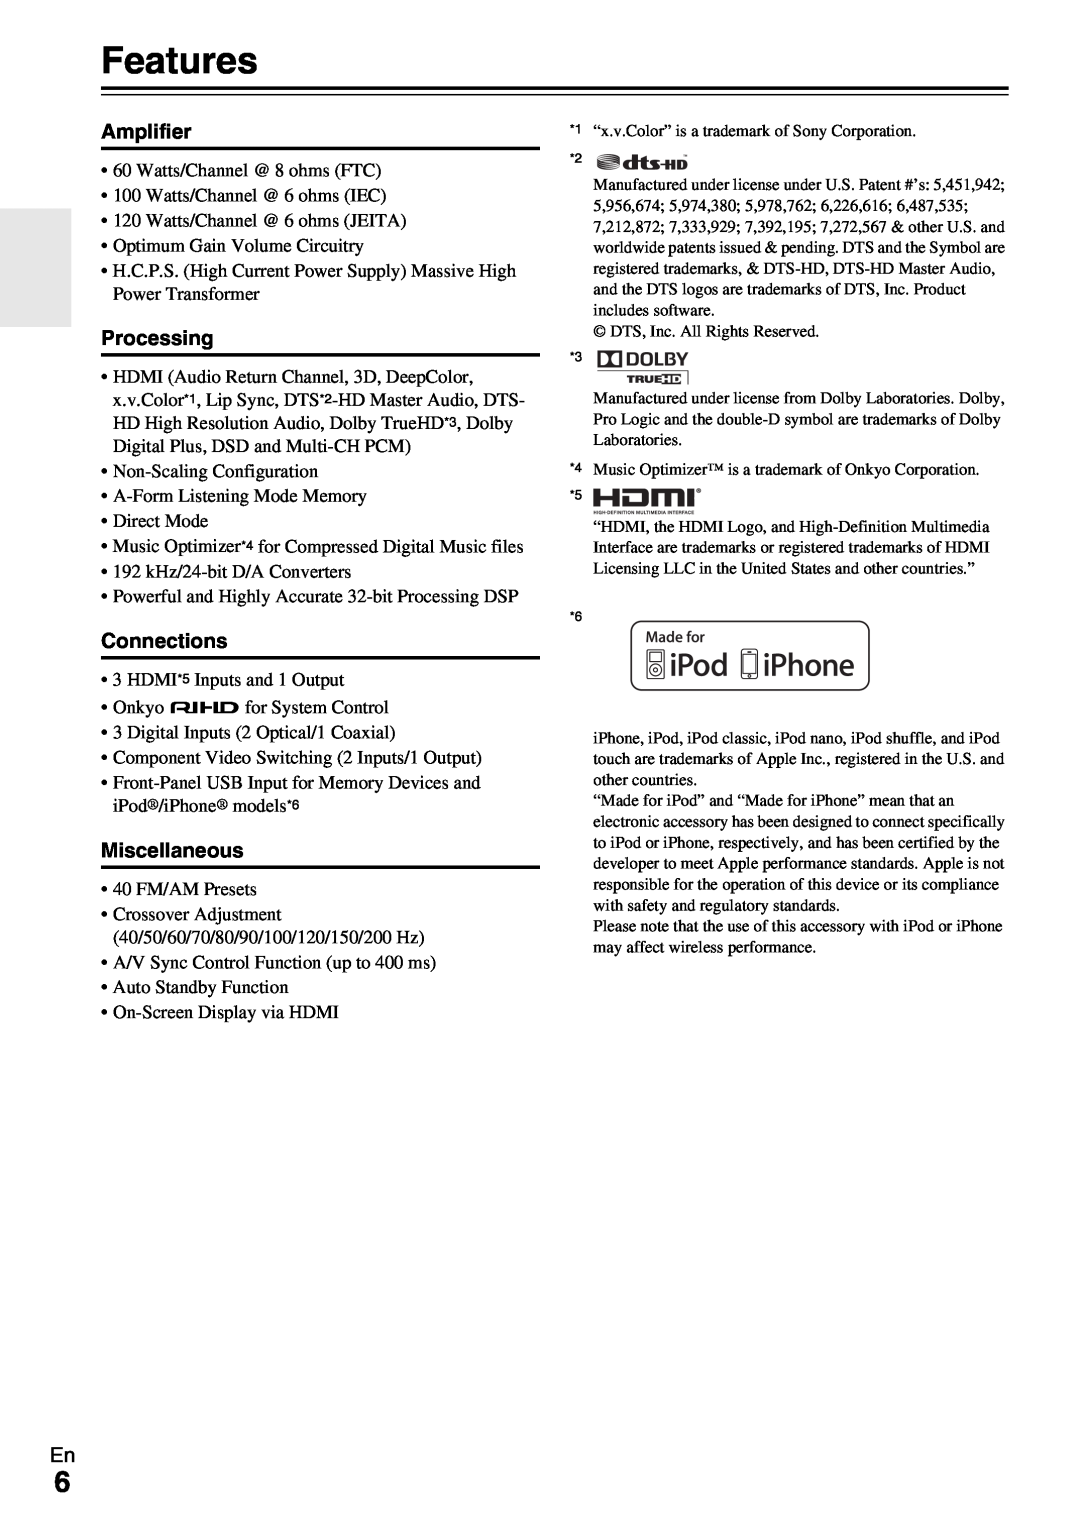 Onkyo HT-RC330 instruction manual Features, Amplifier, Processing, Miscellaneous, Connections 